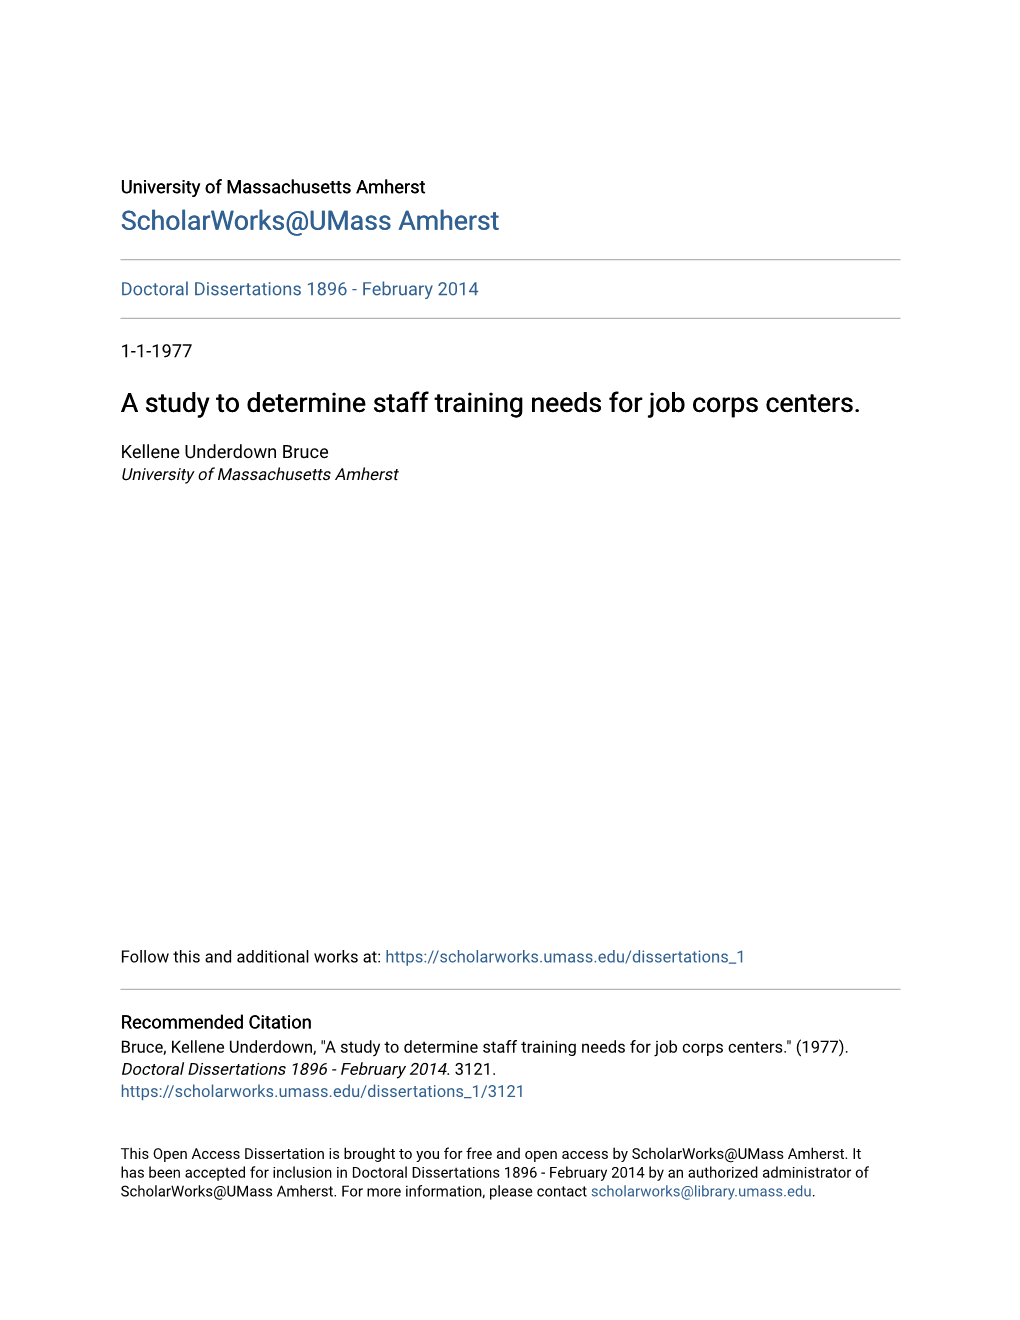 A Study to Determine Staff Training Needs for Job Corps Centers